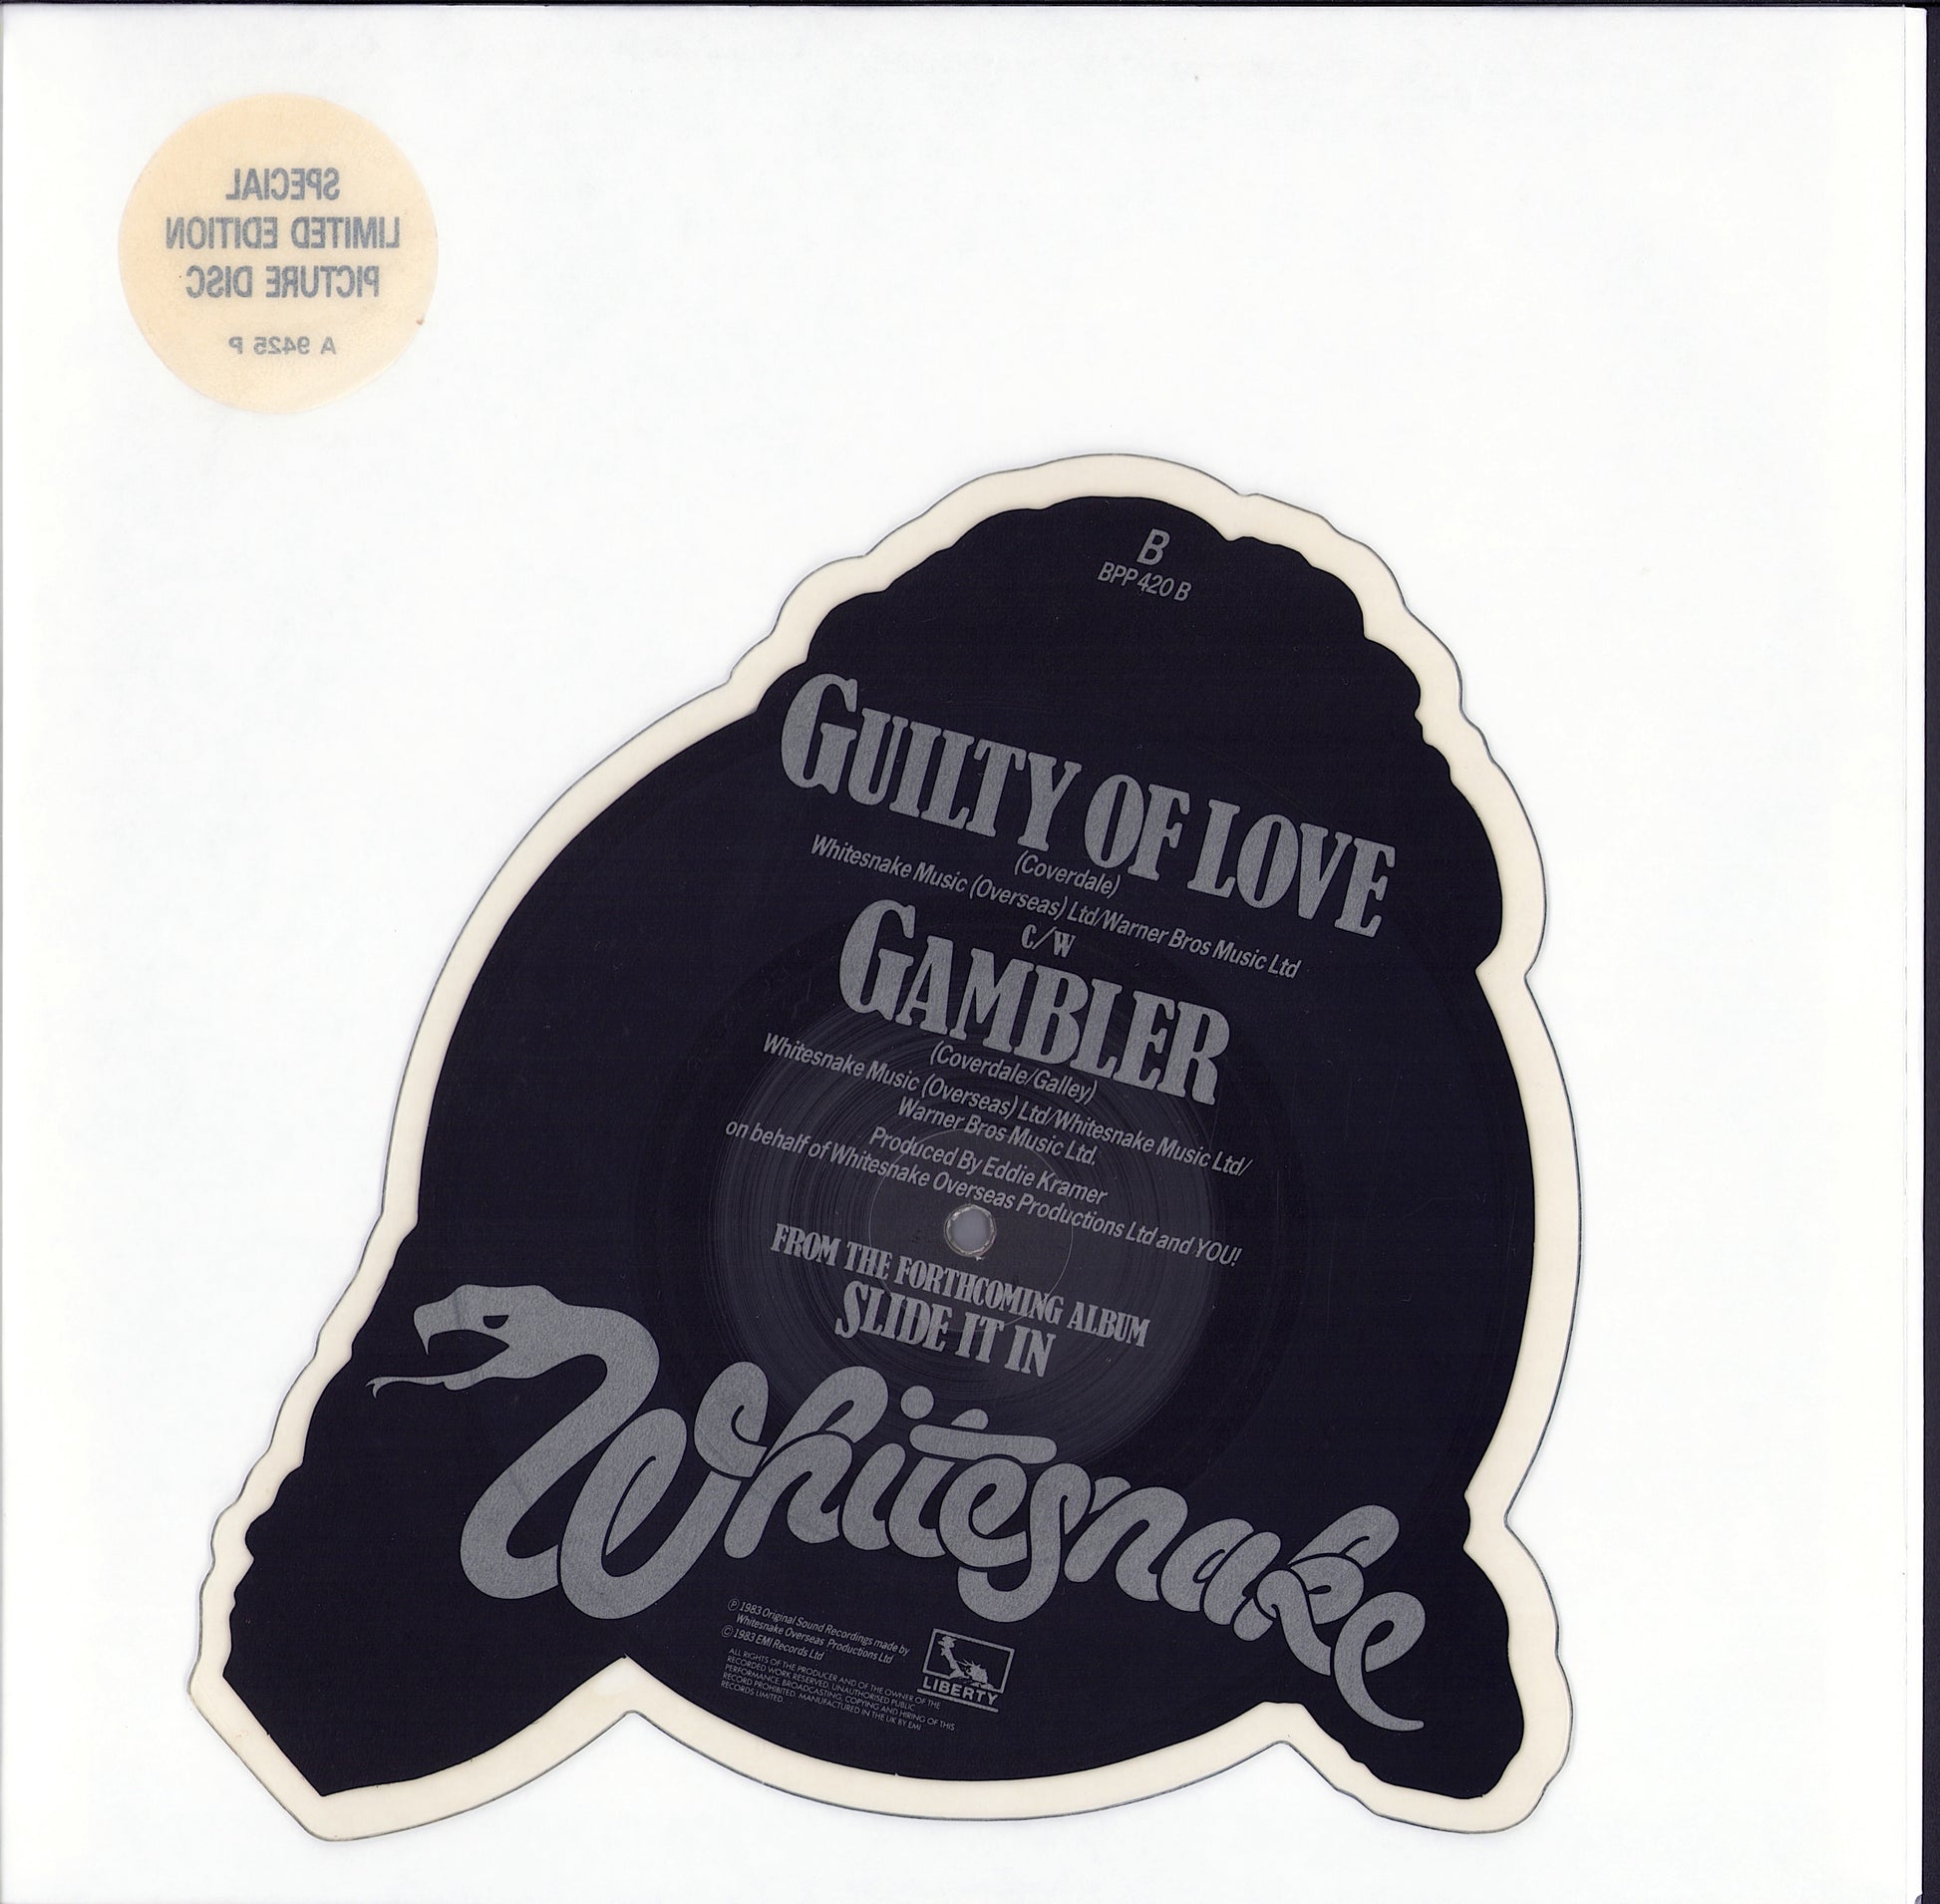 Whitesnake - Guilty Of Love 7" Picture Disc Single